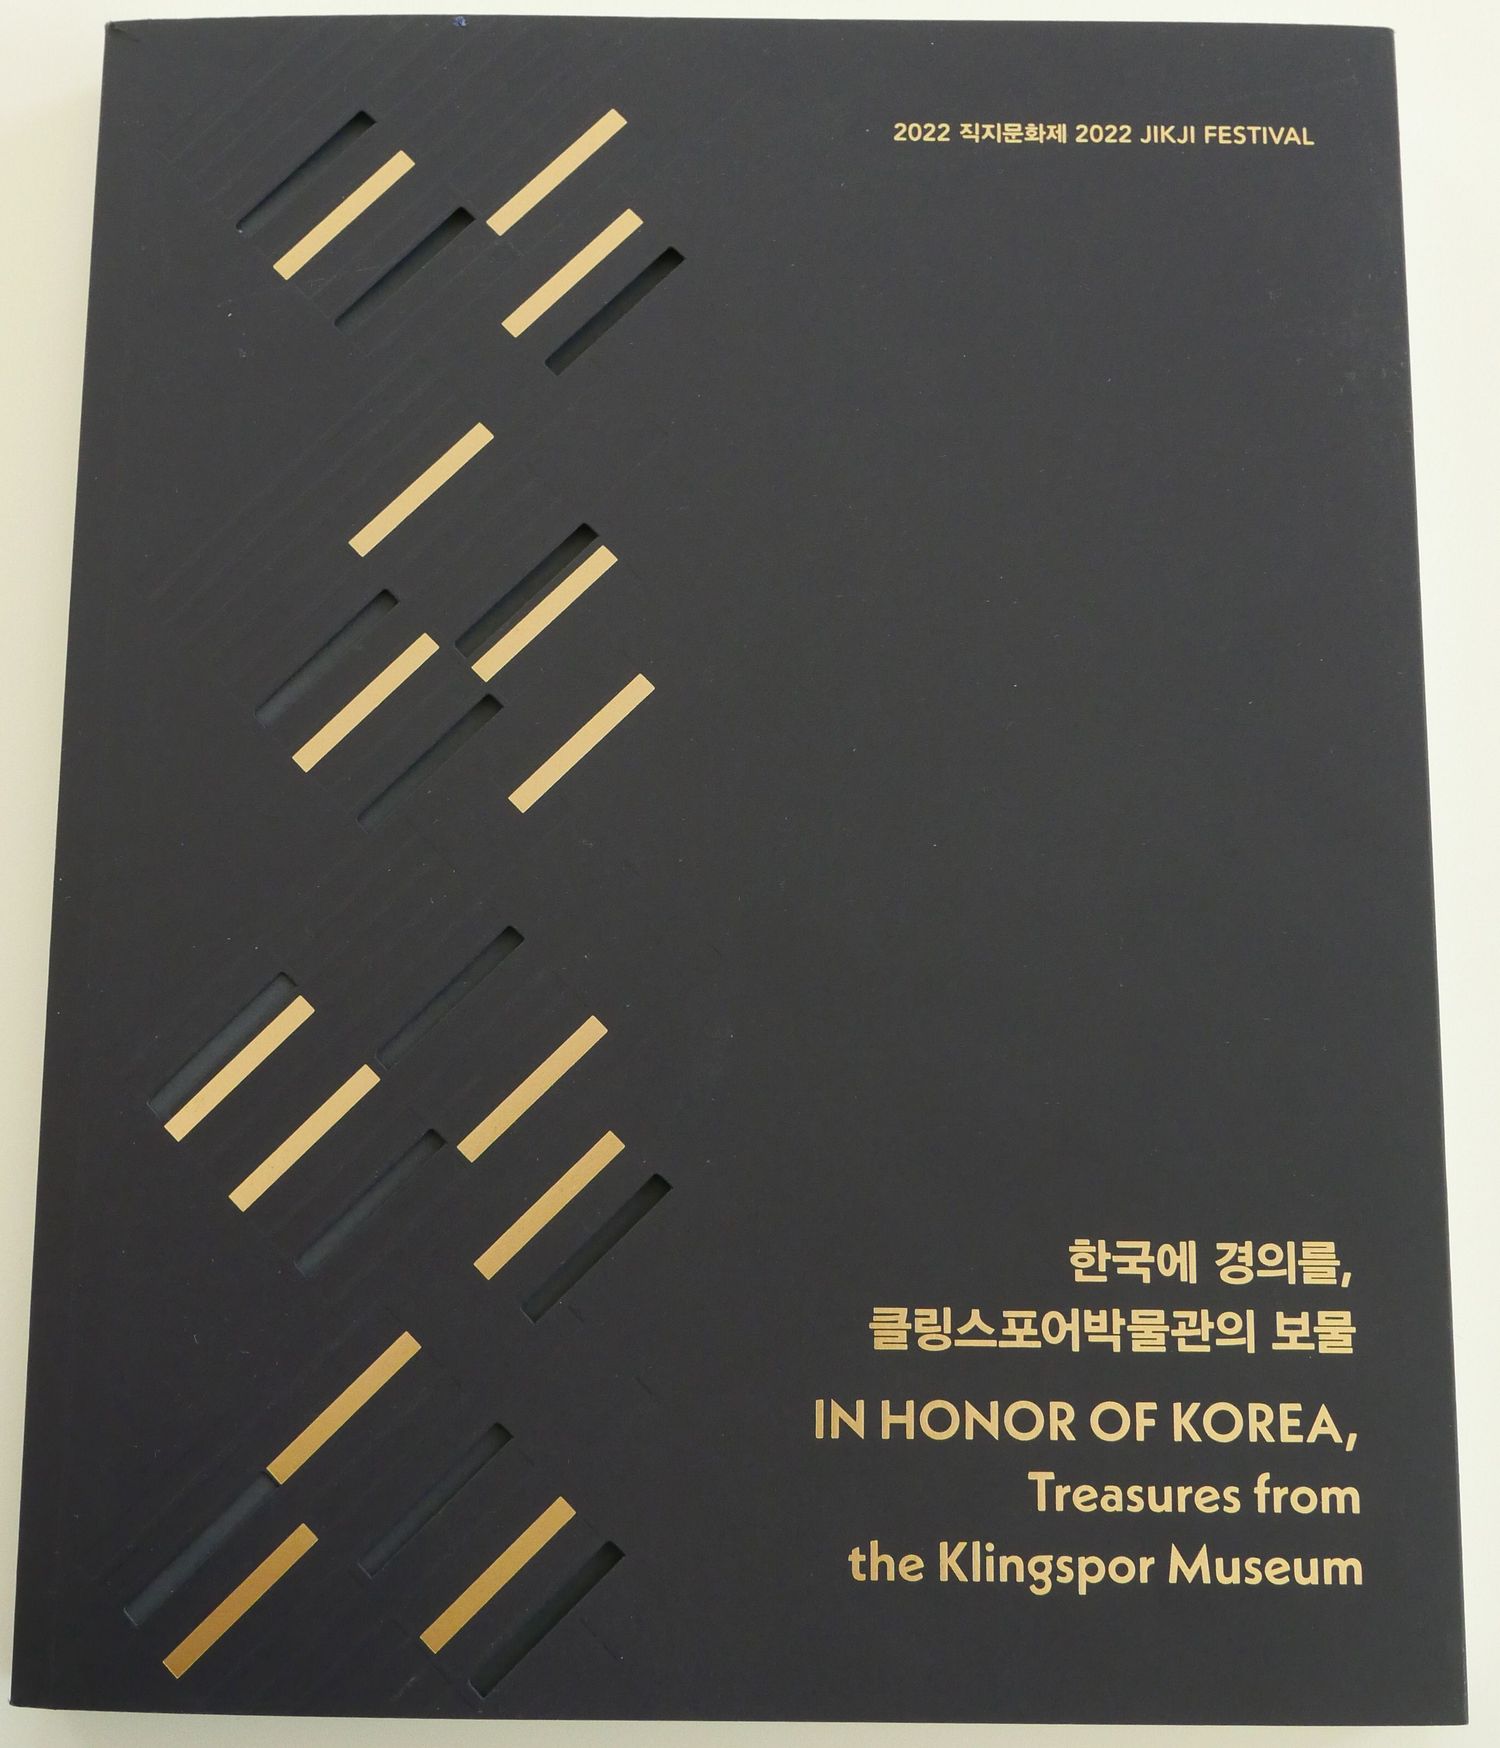 Special Joint Exhibition with the Member of the International Association of Printing Museums Sept. 2 – Oct. 16, 2022 at the Jikji Festival in Gallery 3, Culture Factory in Cheongju, Republik of Korea